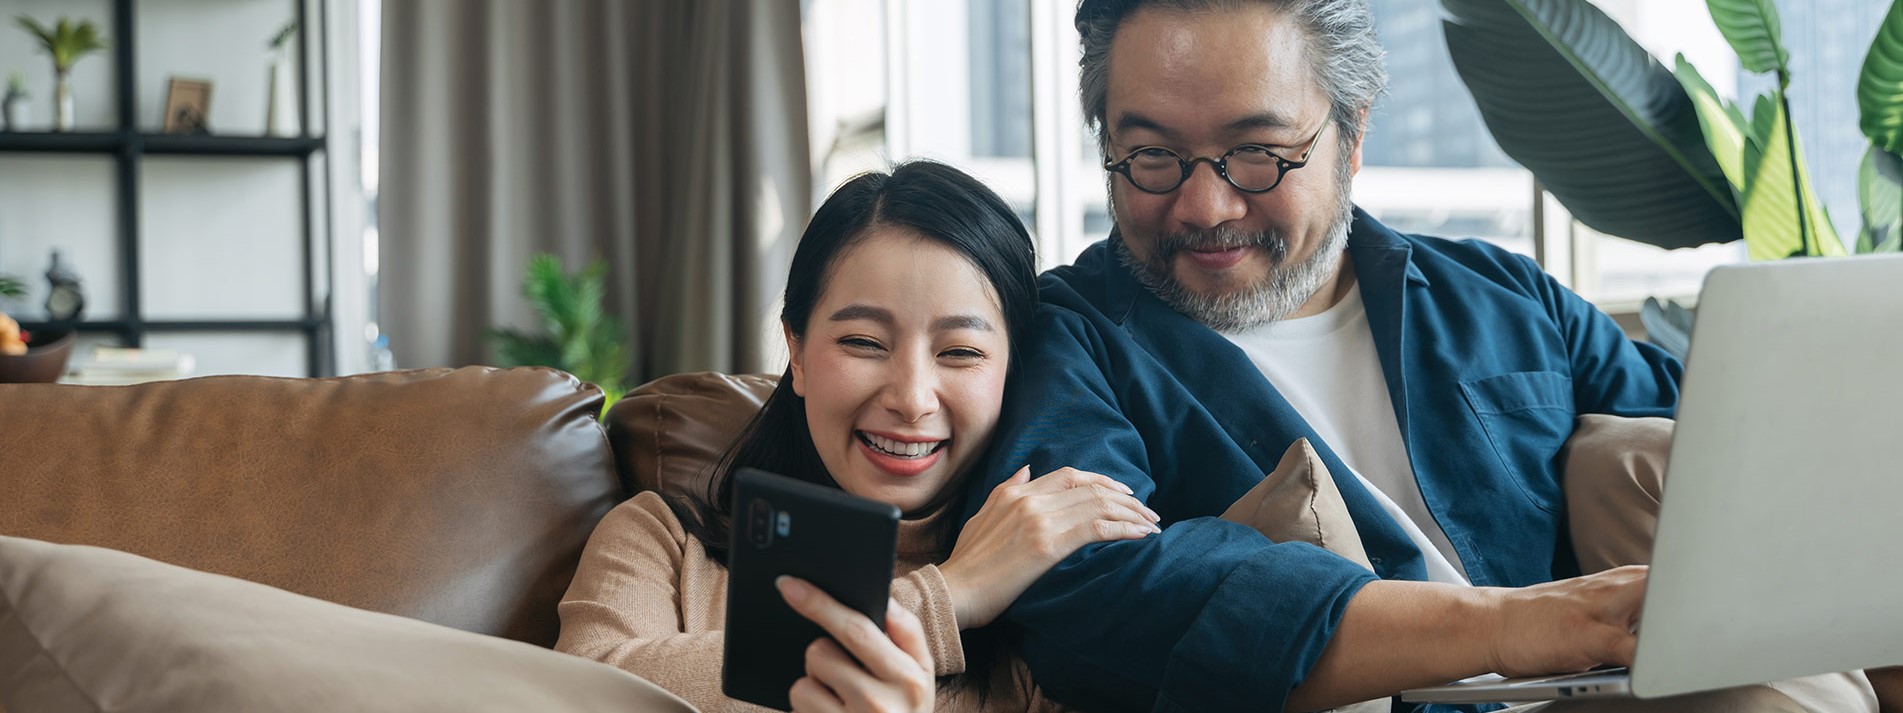 Asian Female Showing Smartphone To Husband In Living Room At Home